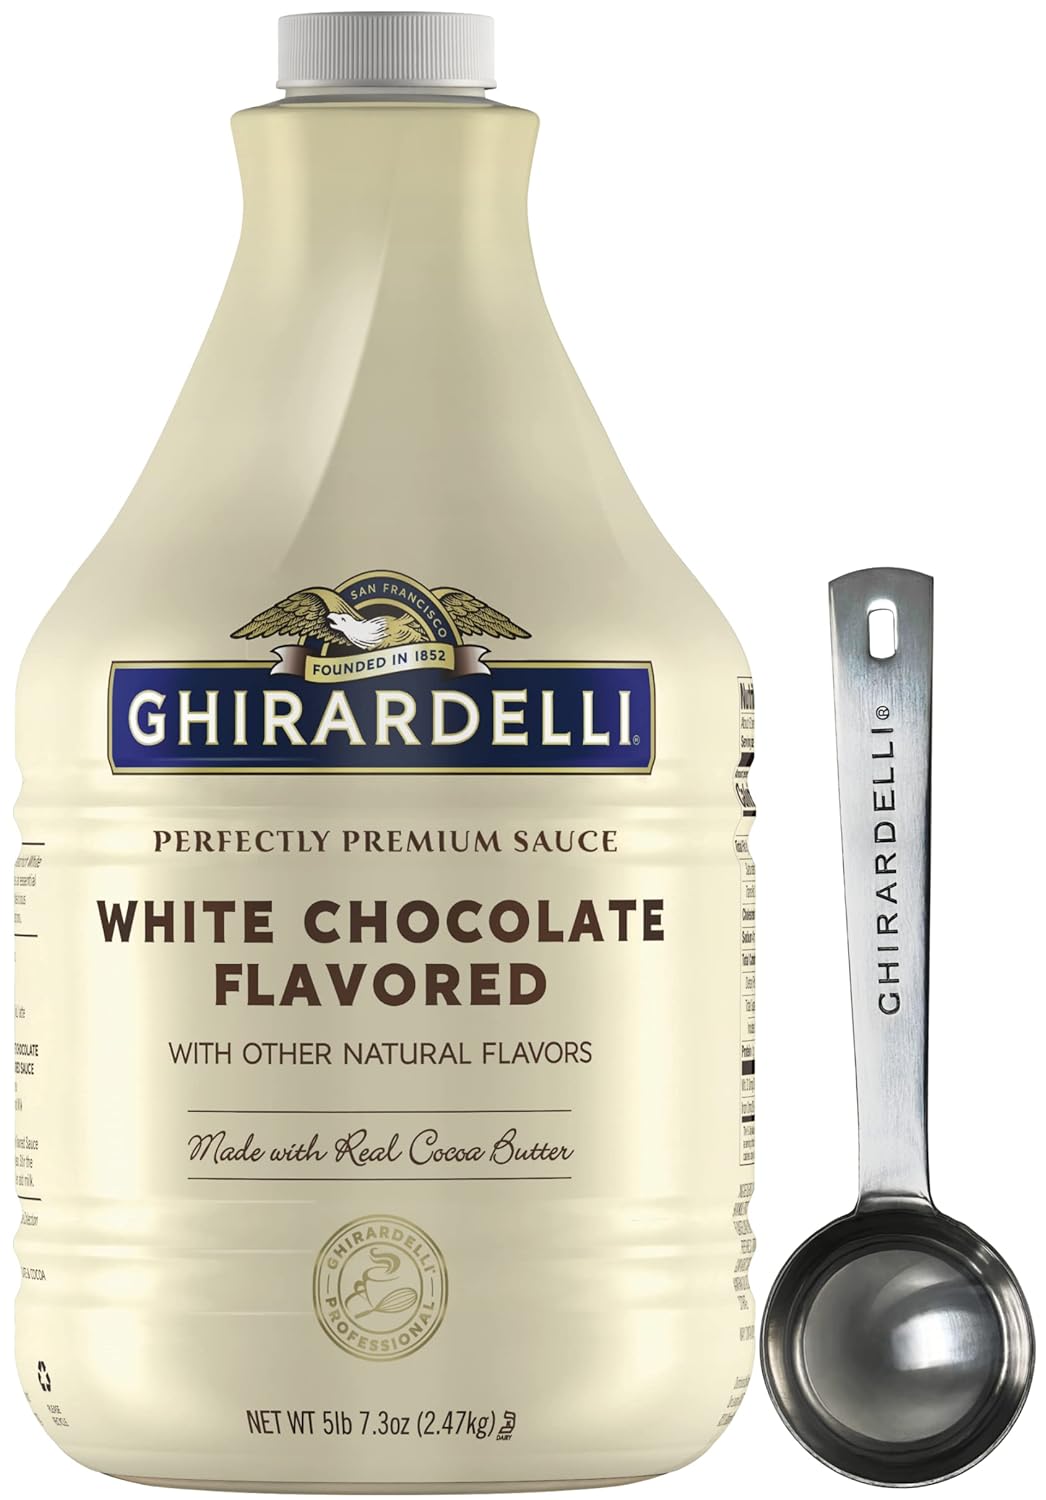 Ghirardelli - White Chocolate Flavored Sauce, 87.3 Ounce Bottle with Ghirardelli Stamped Barista Spoon